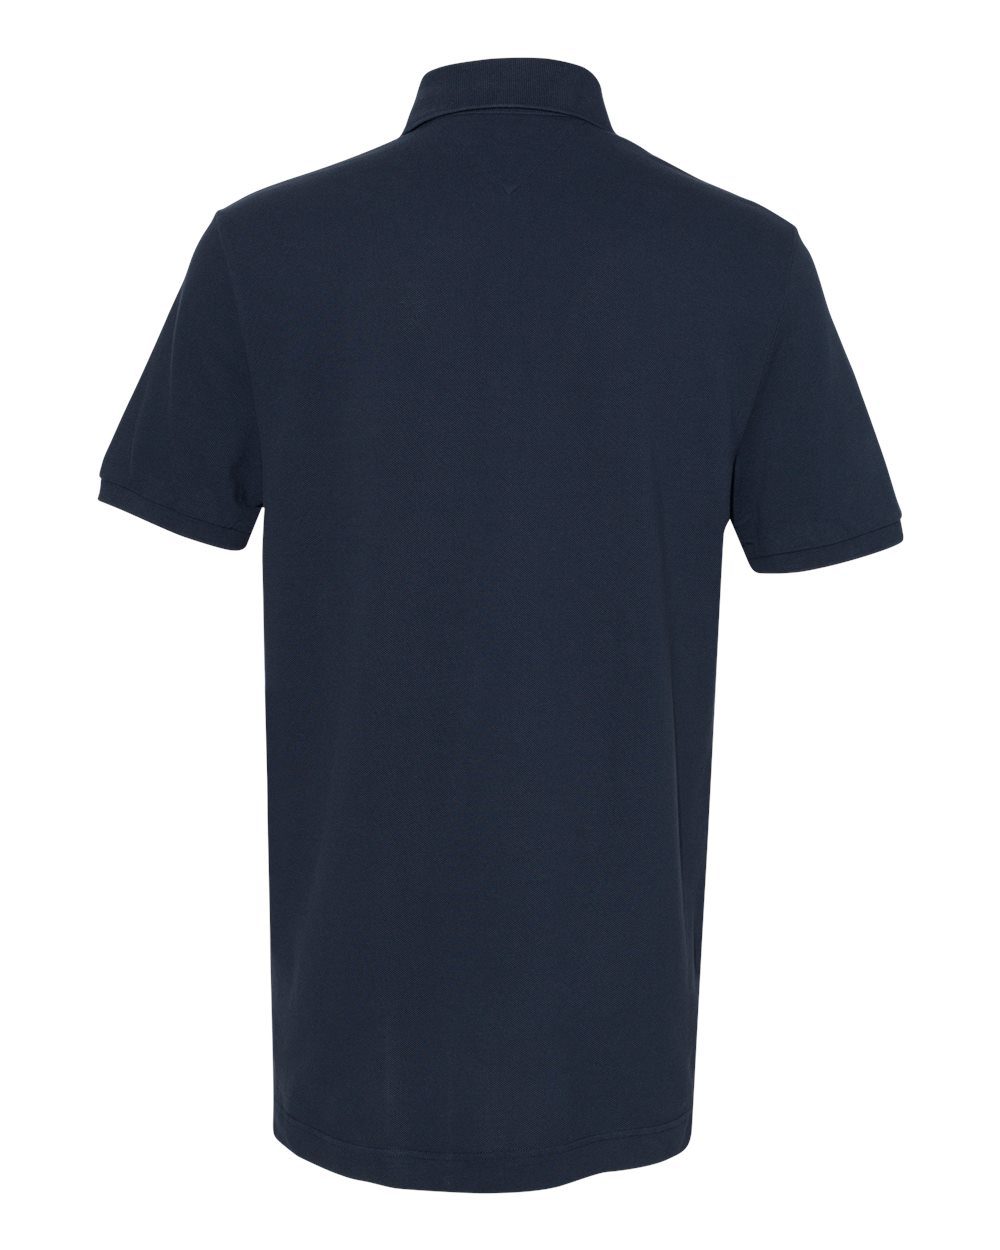 Tommy Hilfiger Classic Fit Ivy Pique Polo #13H1867 Navy Back